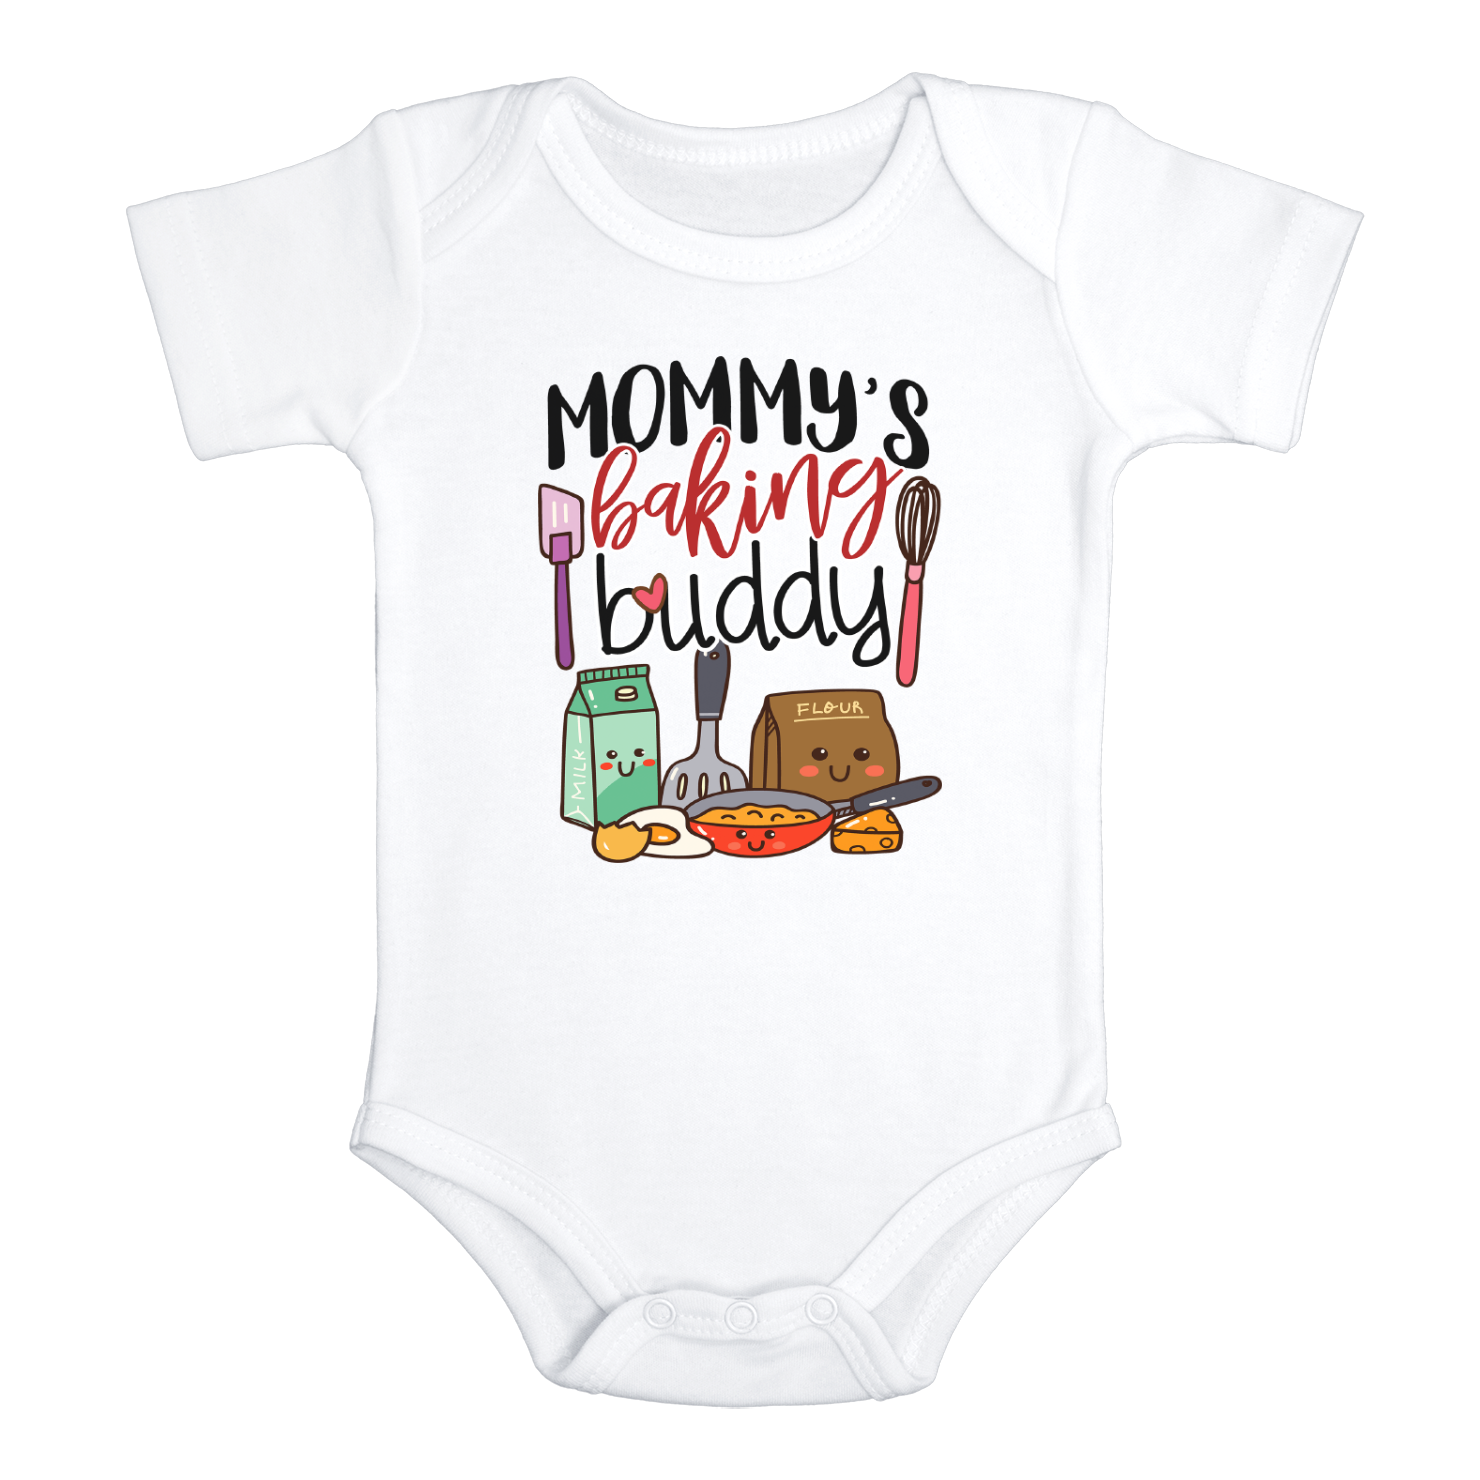 MOMMY'S BAKING BUDDY Funny baby Cooking onesies bodysuit (white: short or long sleeve)